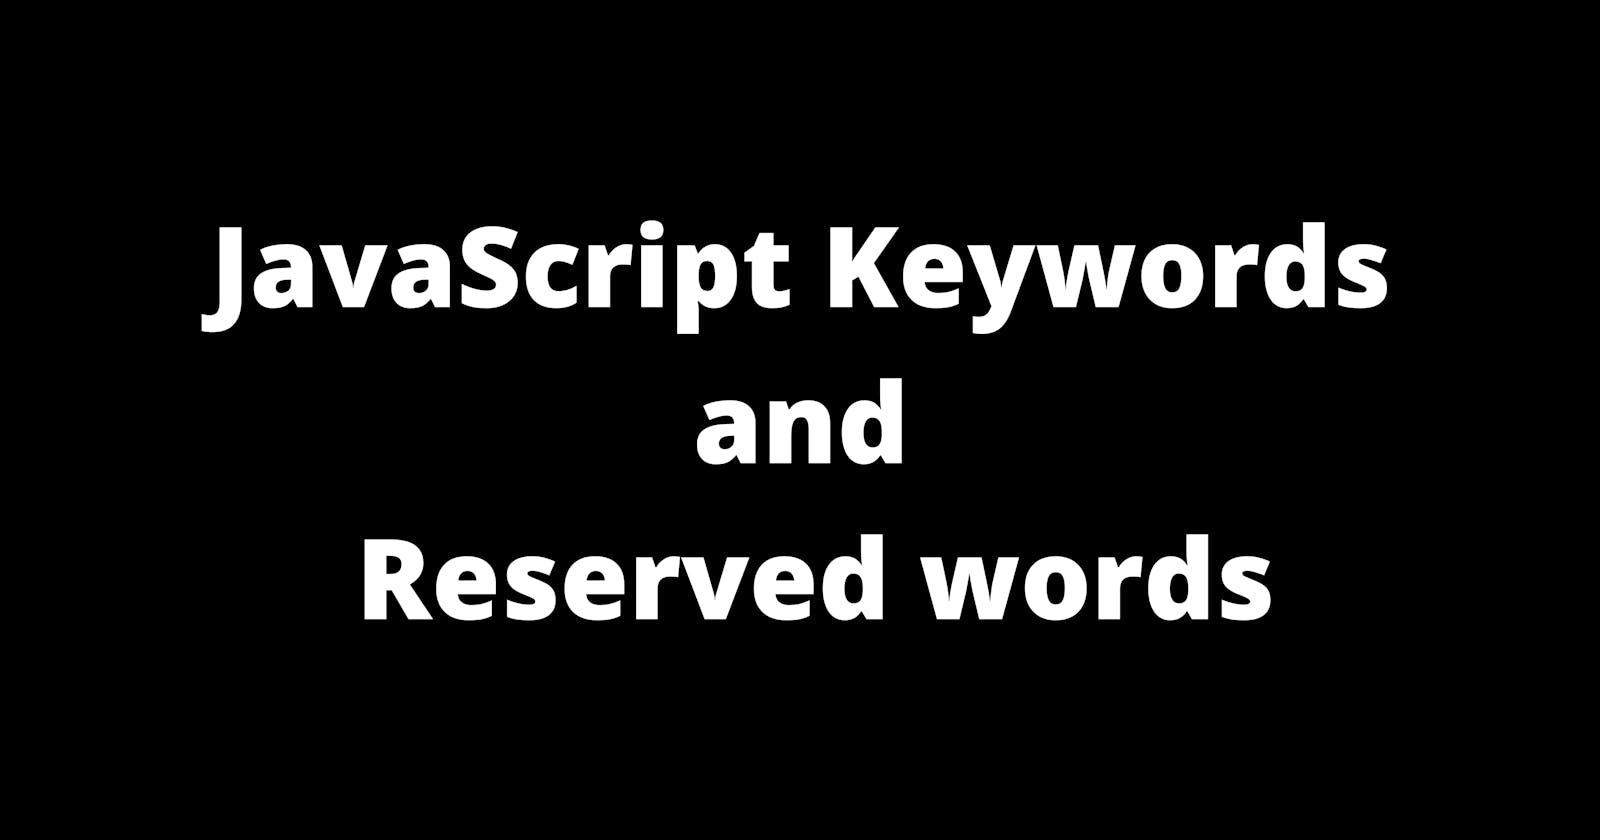 List of JavaScript keywords and reserved words